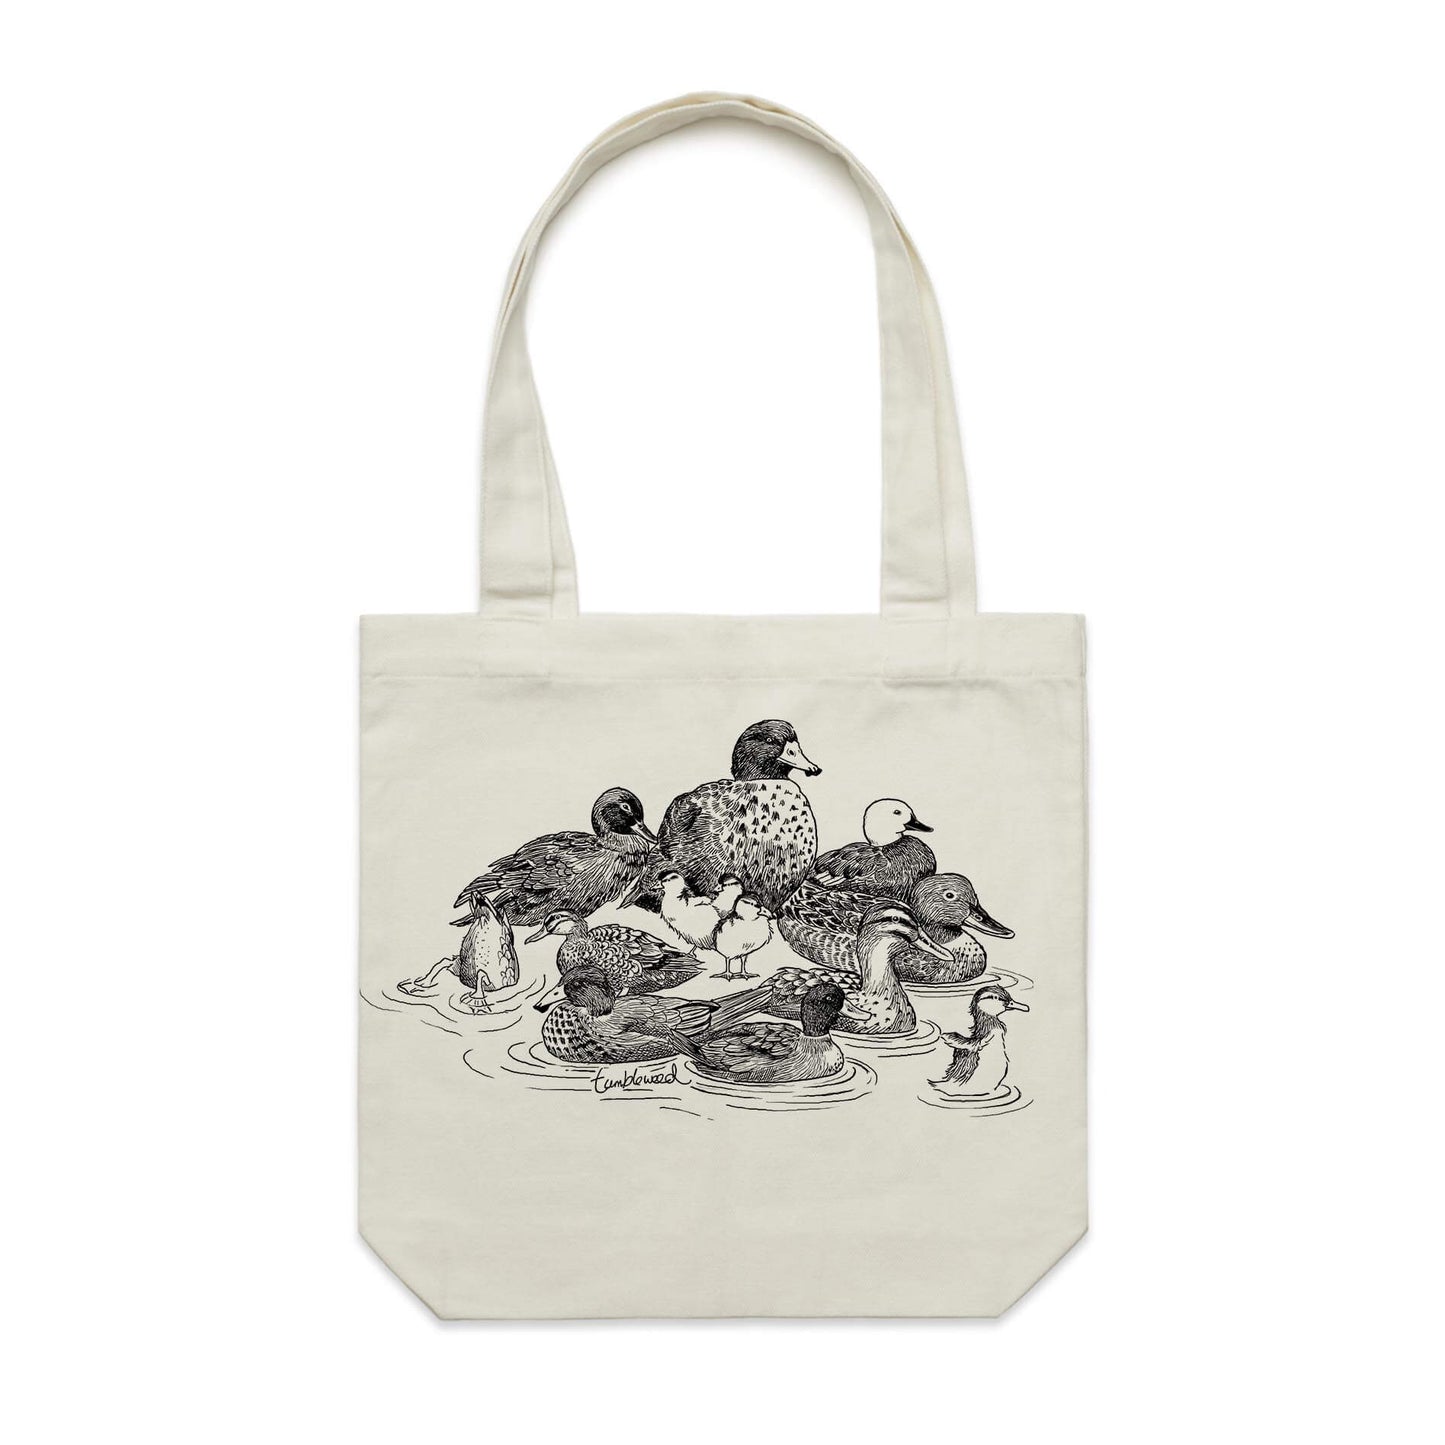 Cotton canvas tote bag with a screen printed NZ Ducks design.